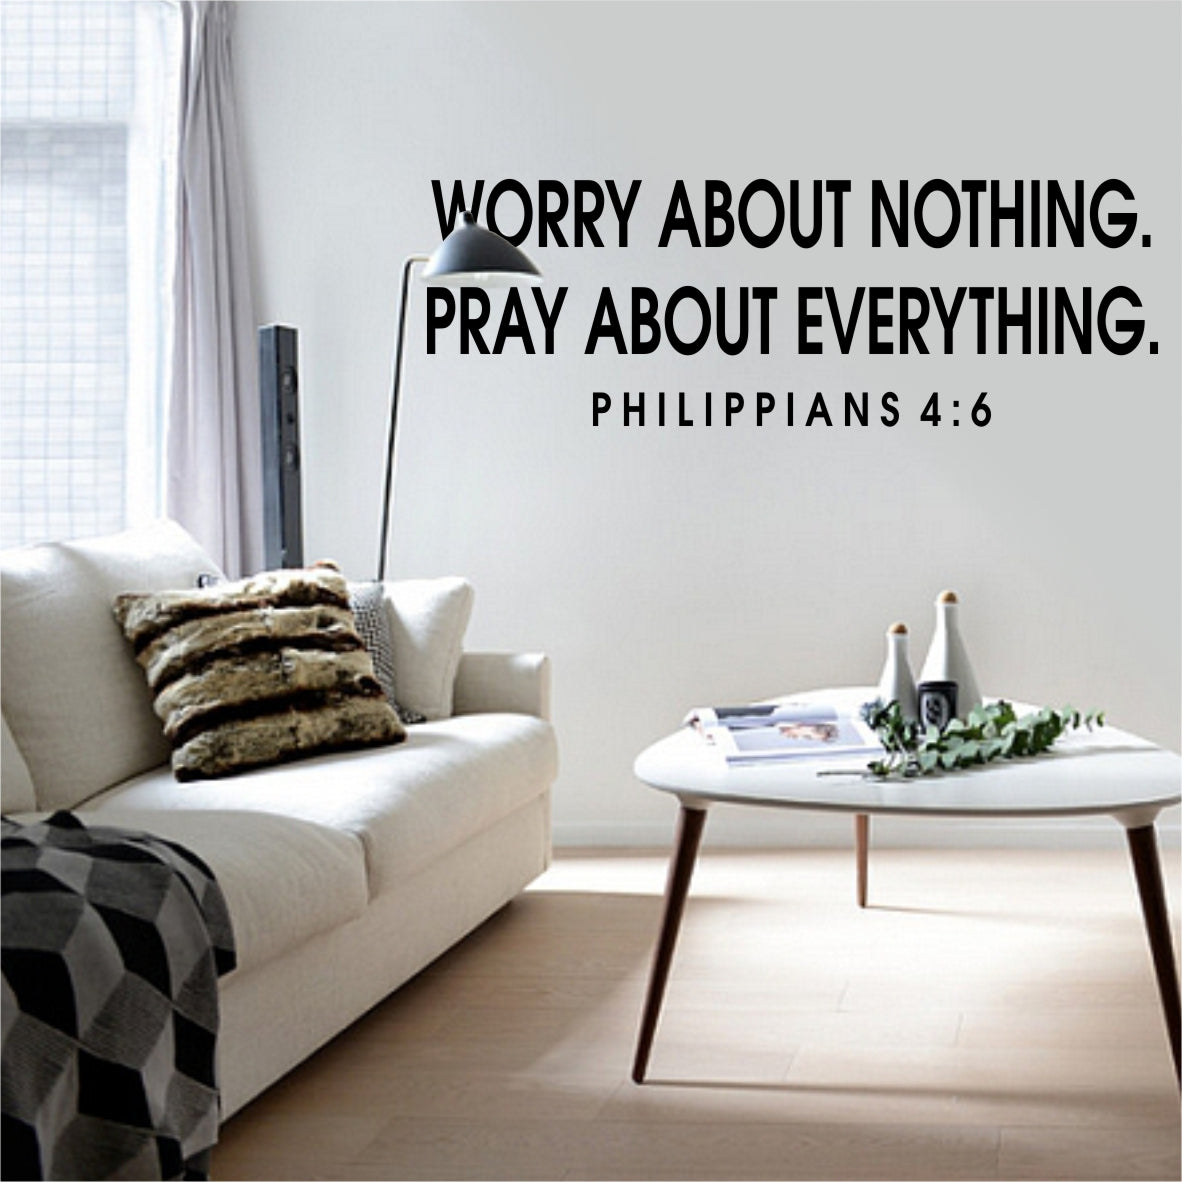 WORRY ABOUT NOTHING